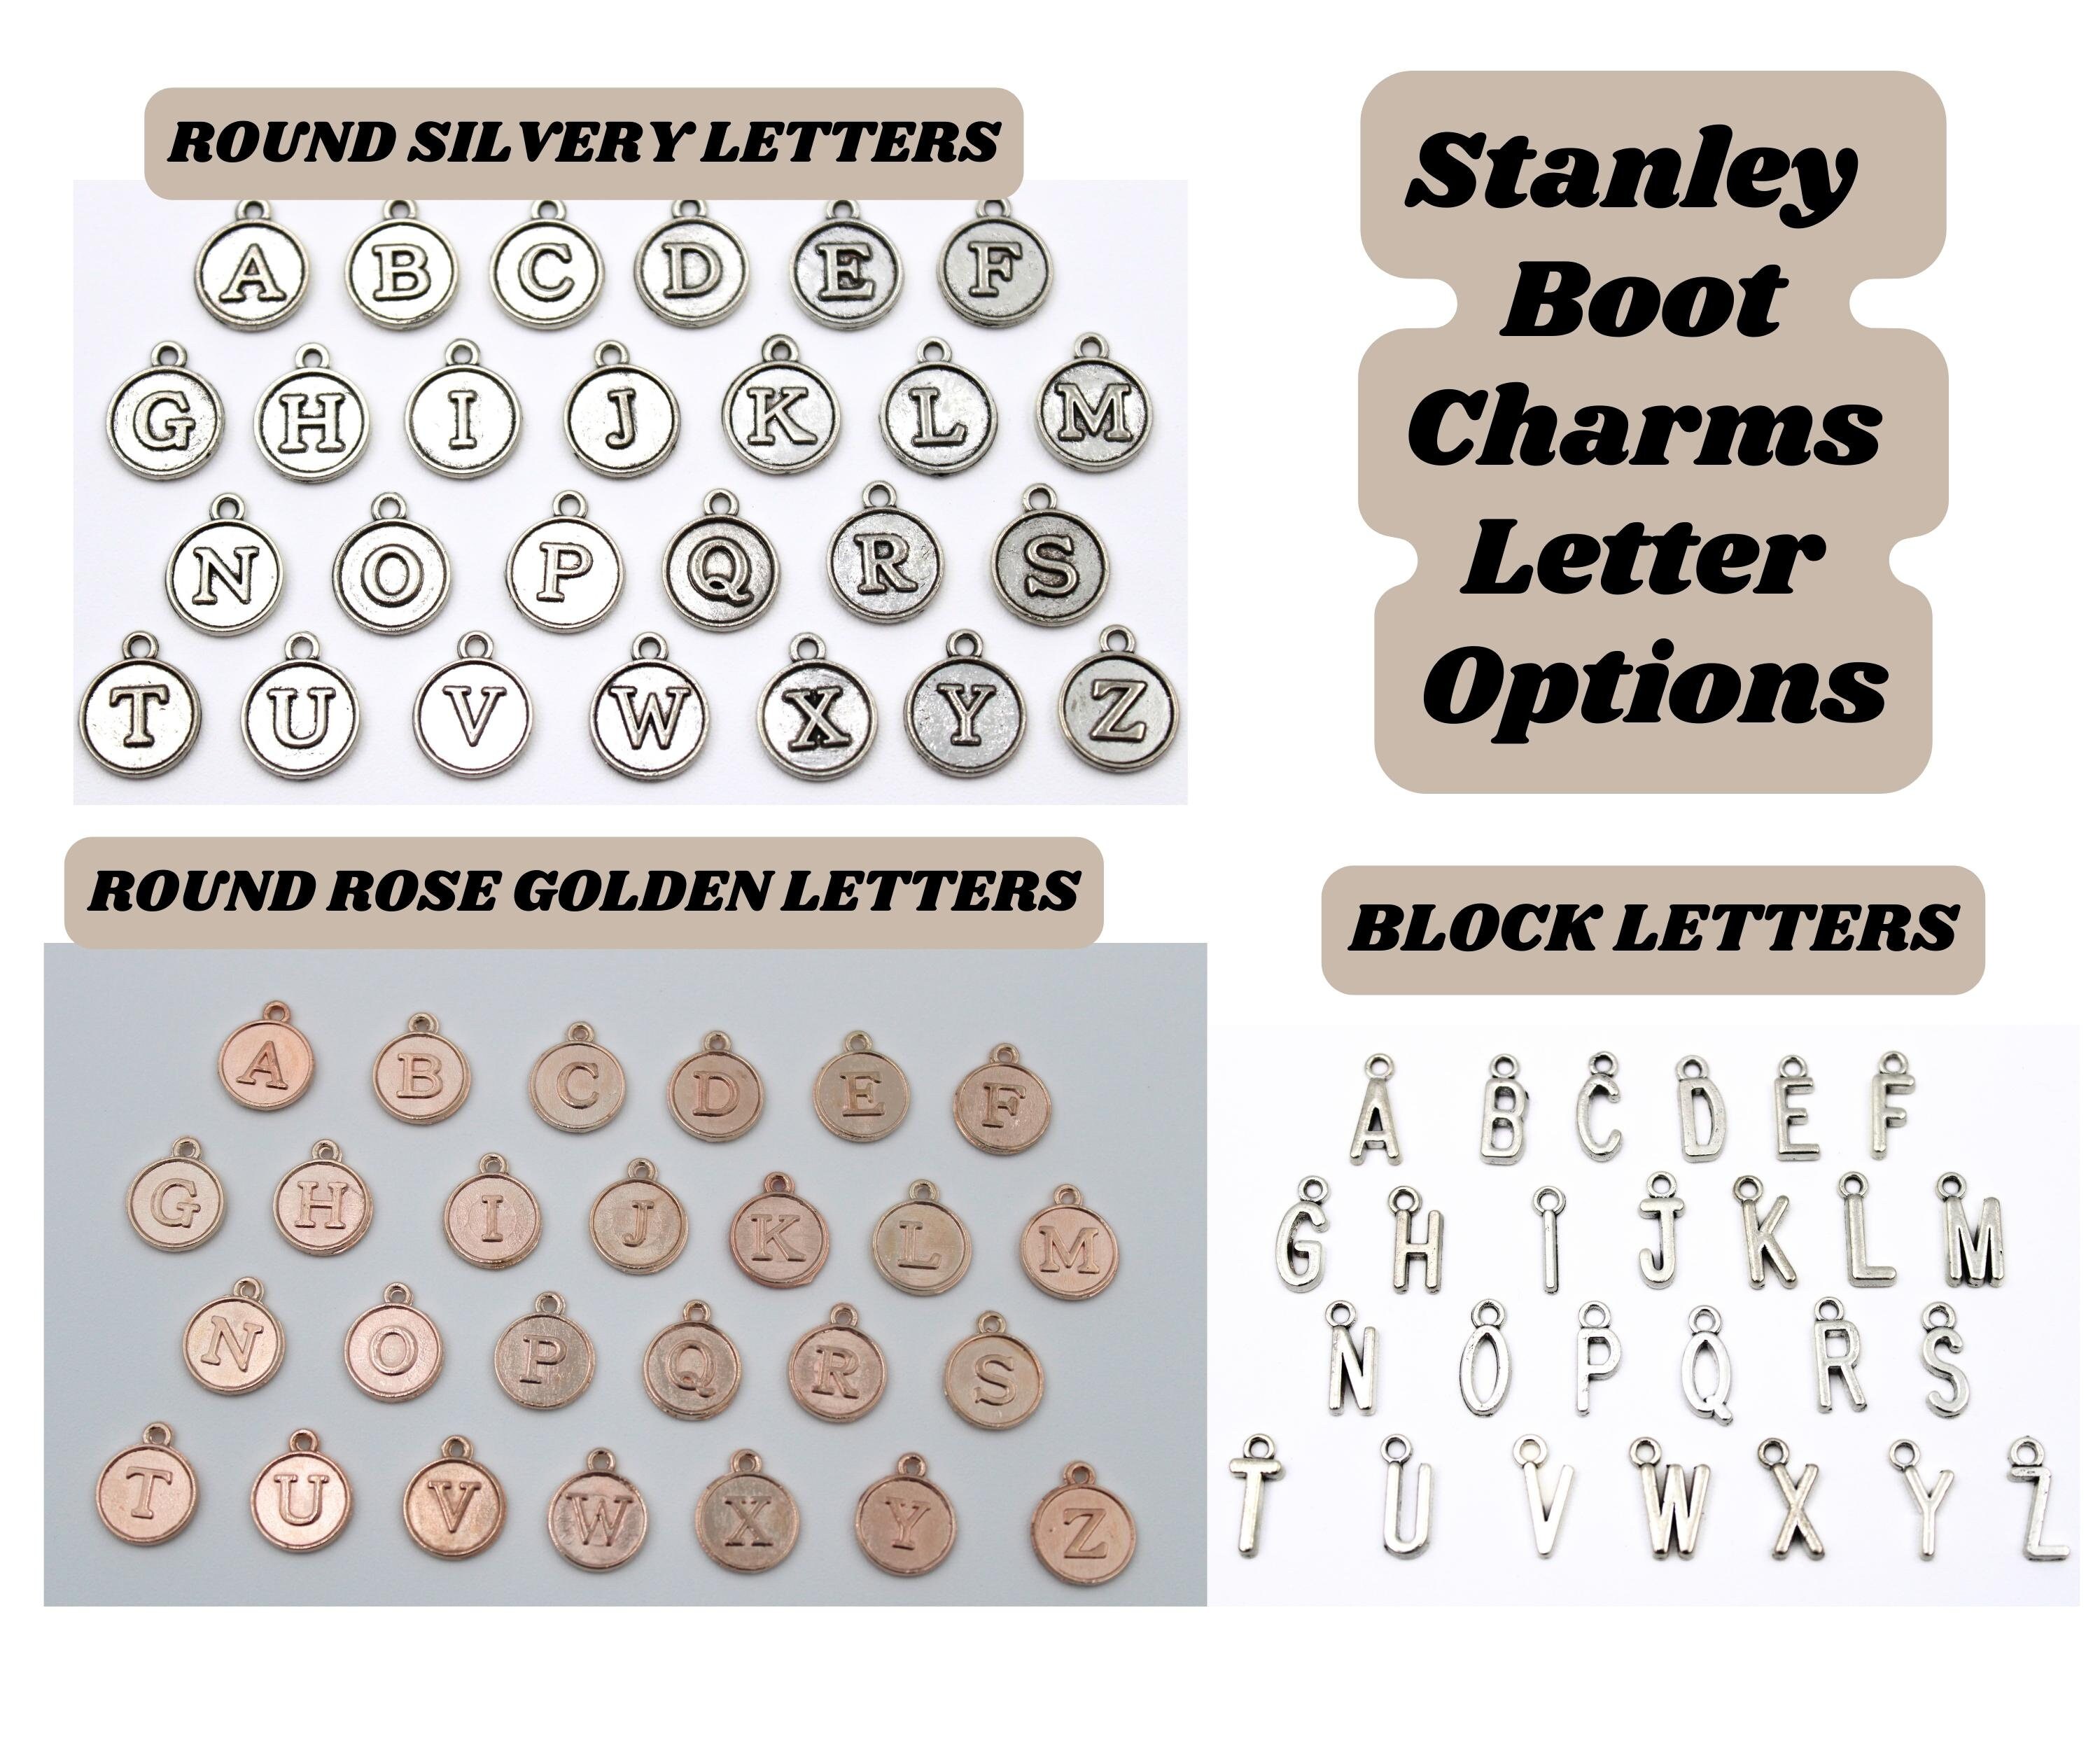 Stanley Cup Gothic Initial Charm P